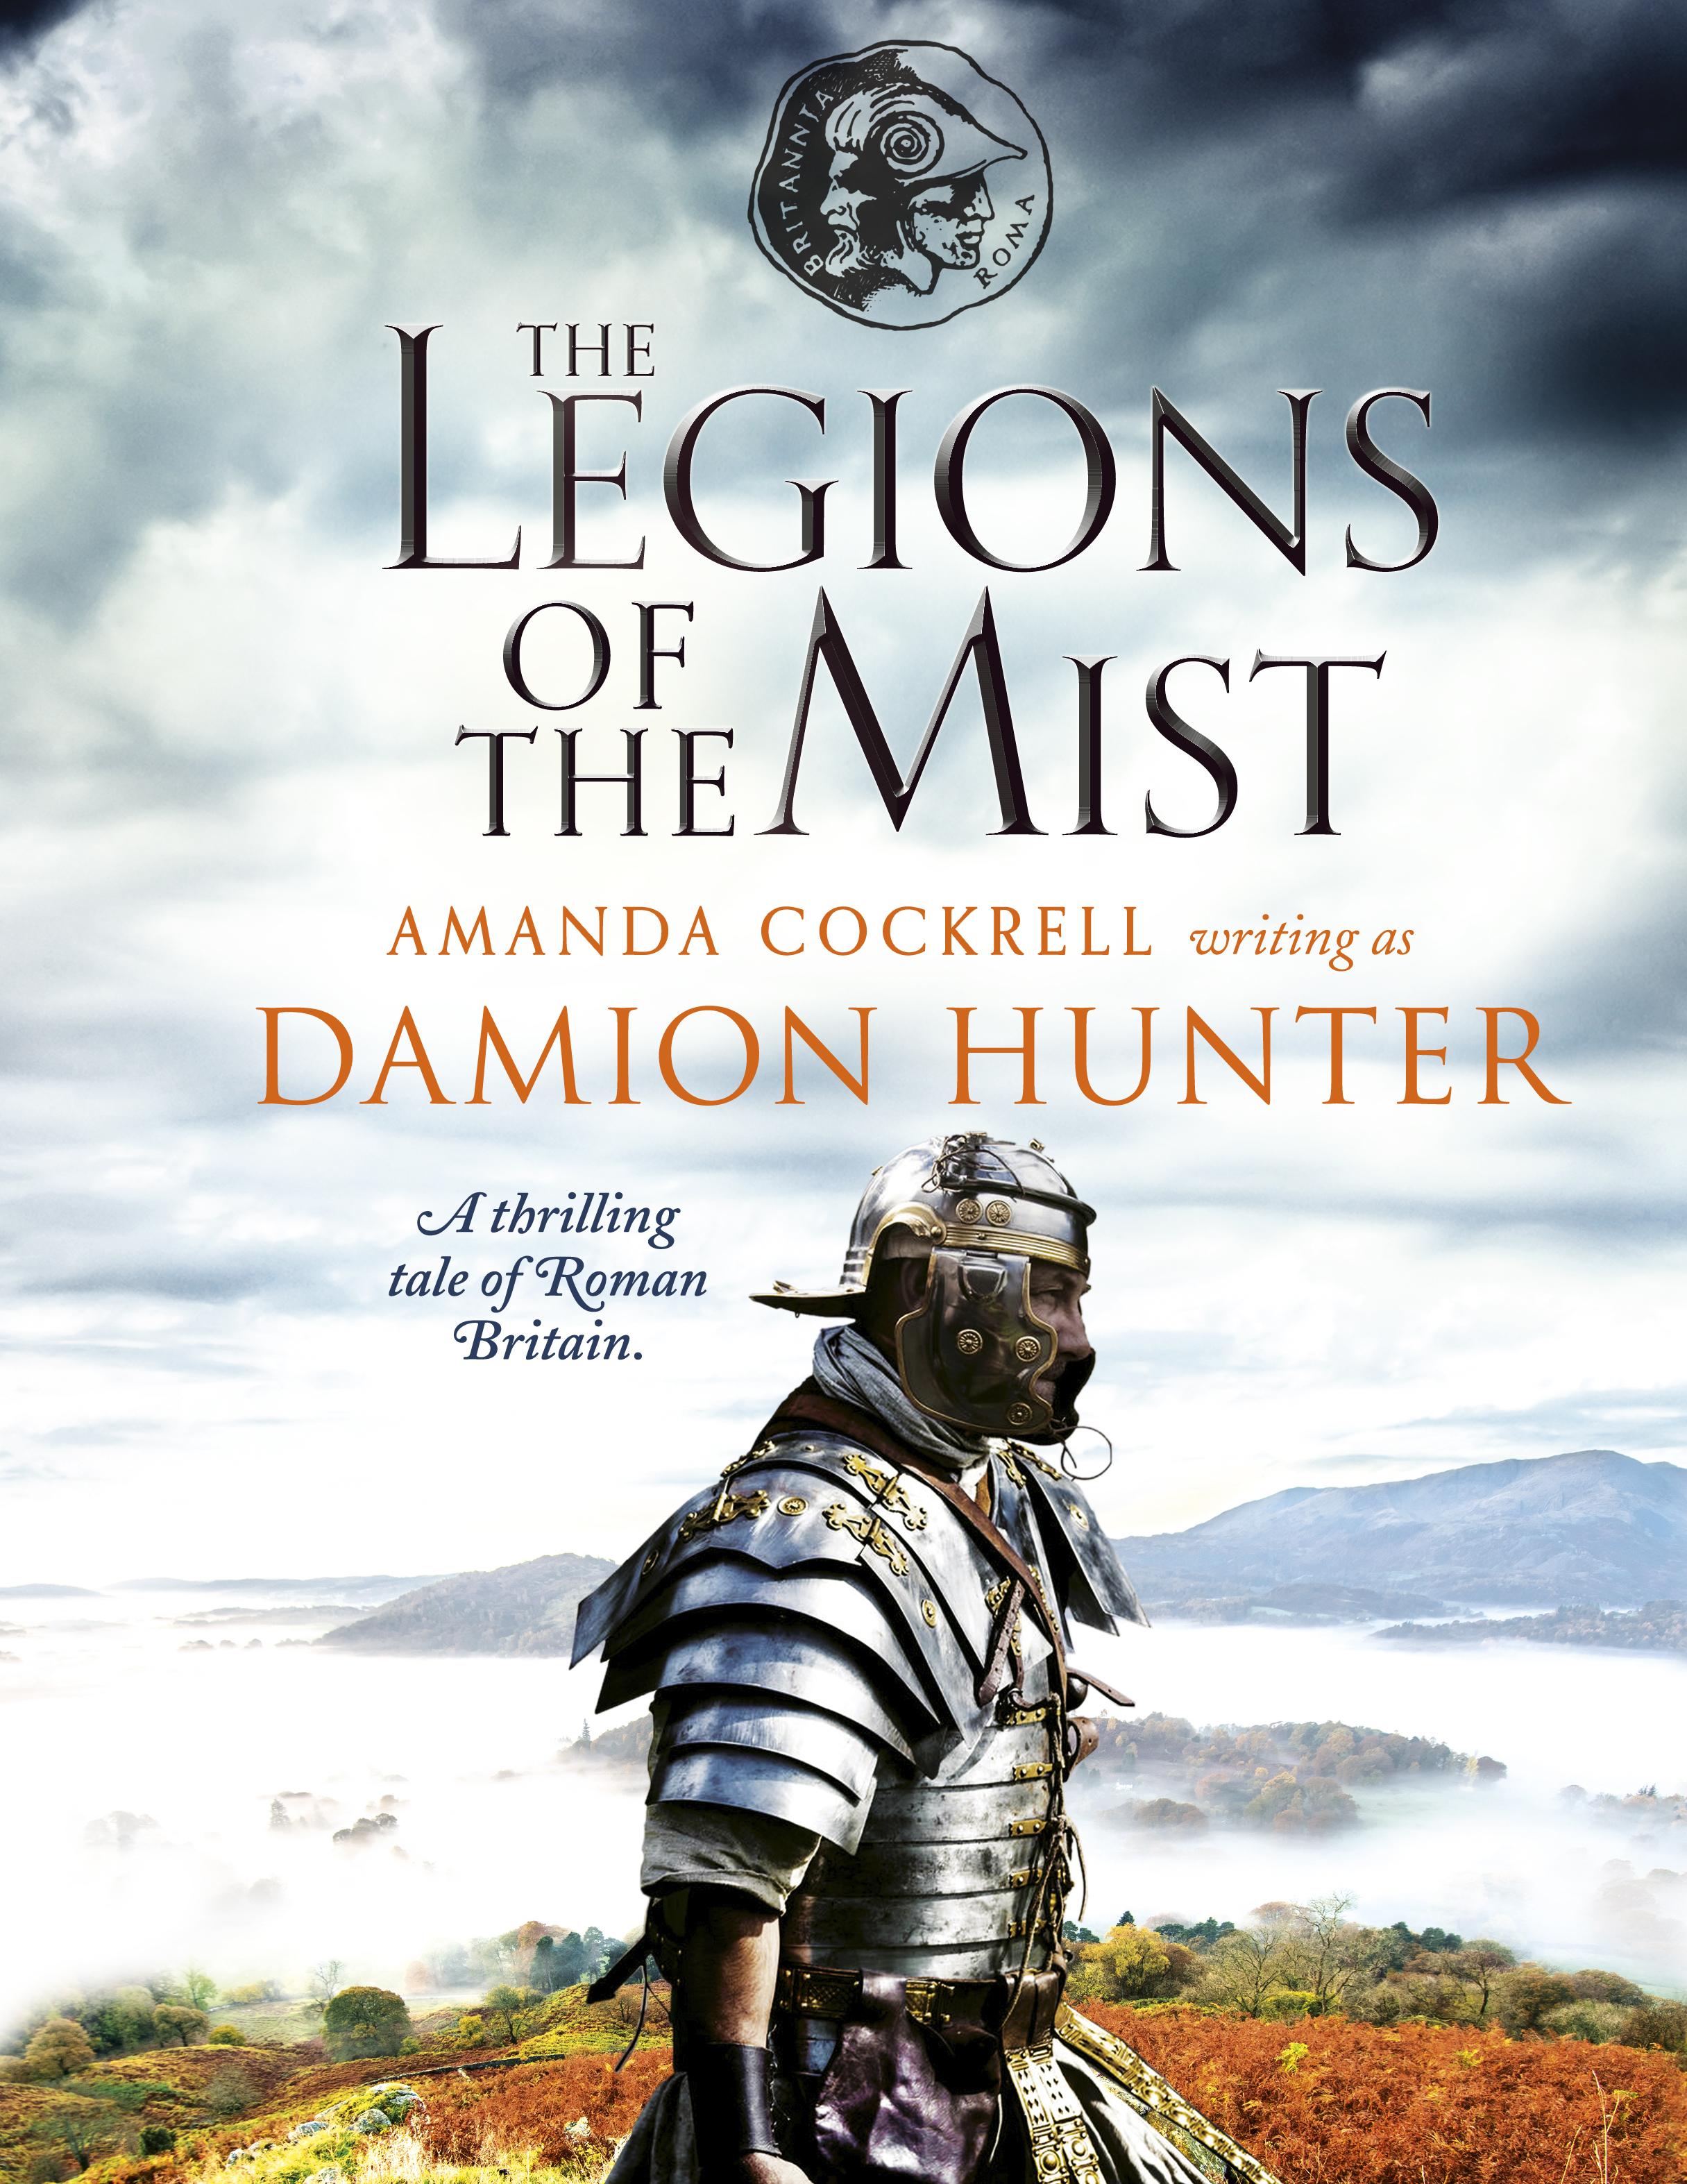 Cover of The Legions of the Mist reissue with link to Amazon.